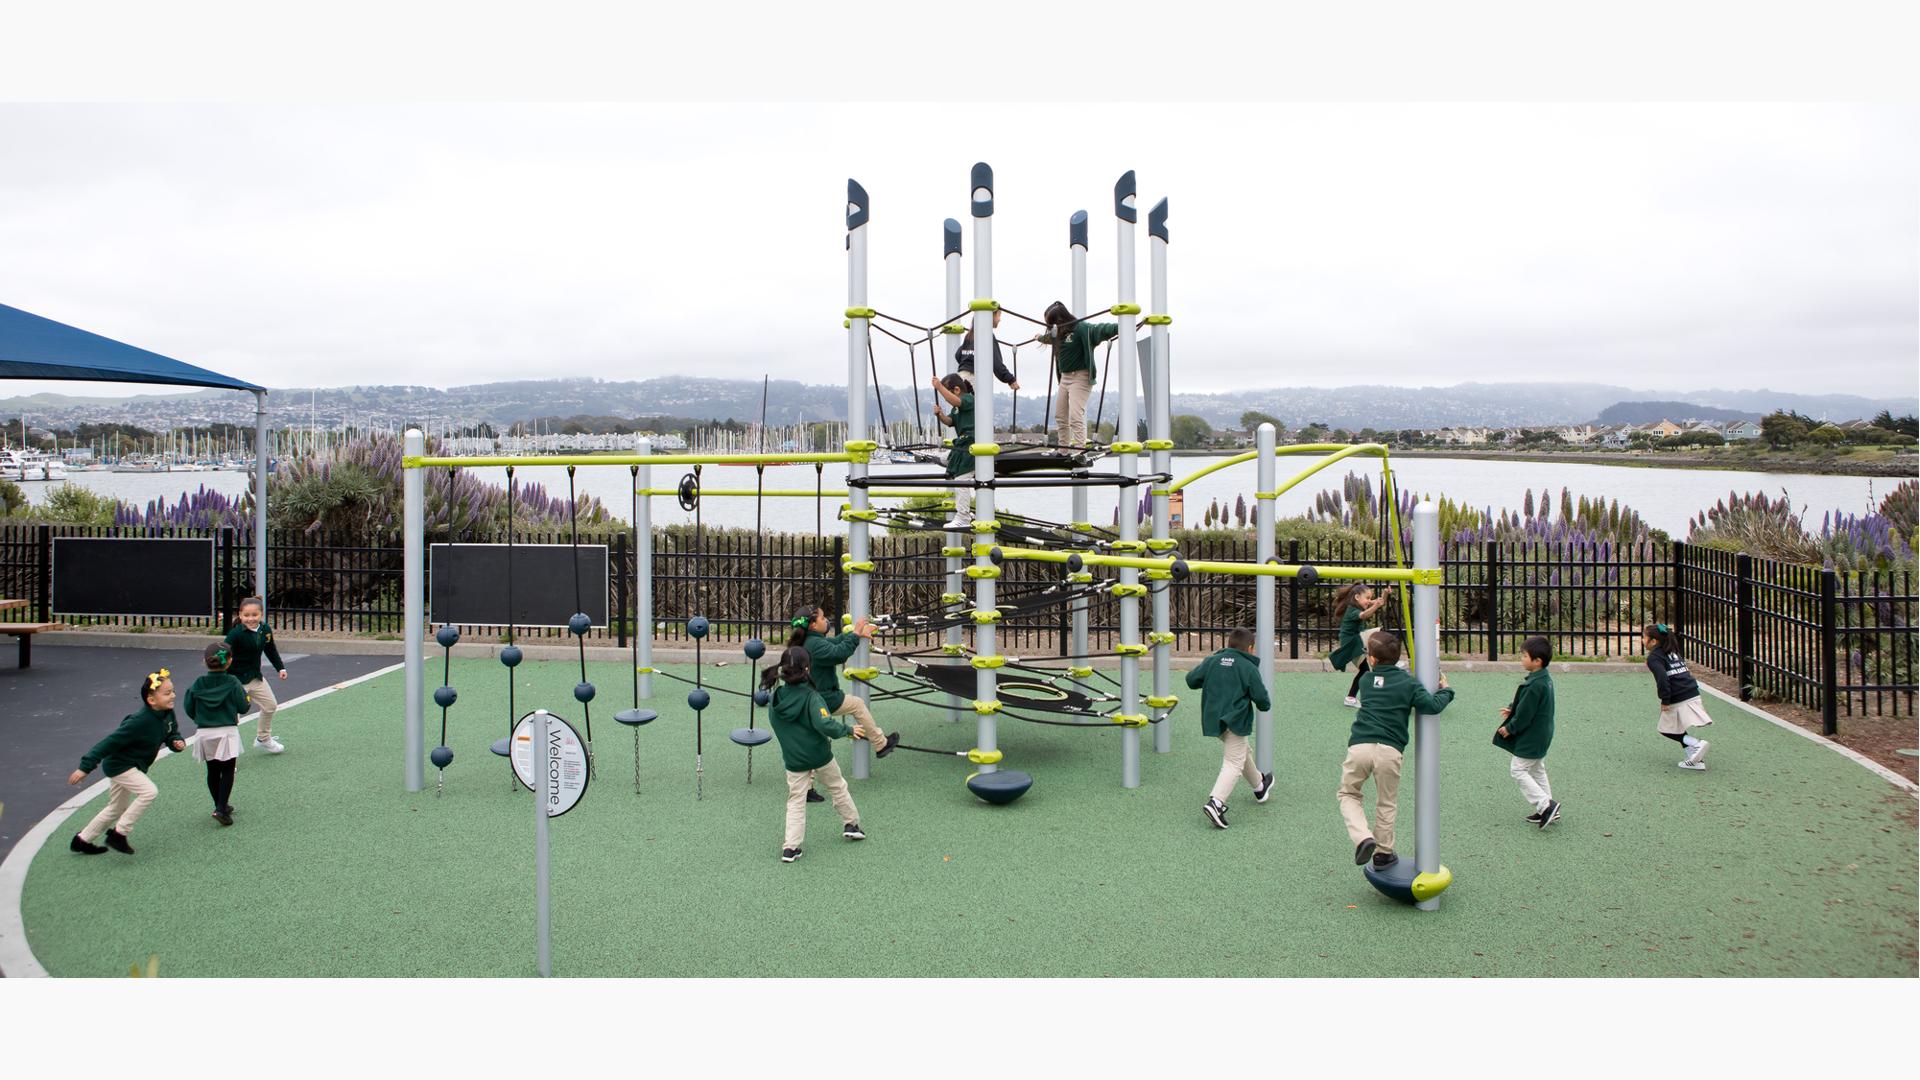 Kids dressed in the school uniforms play all over a tower structure with additional climbers, spinners, and other playground activities.